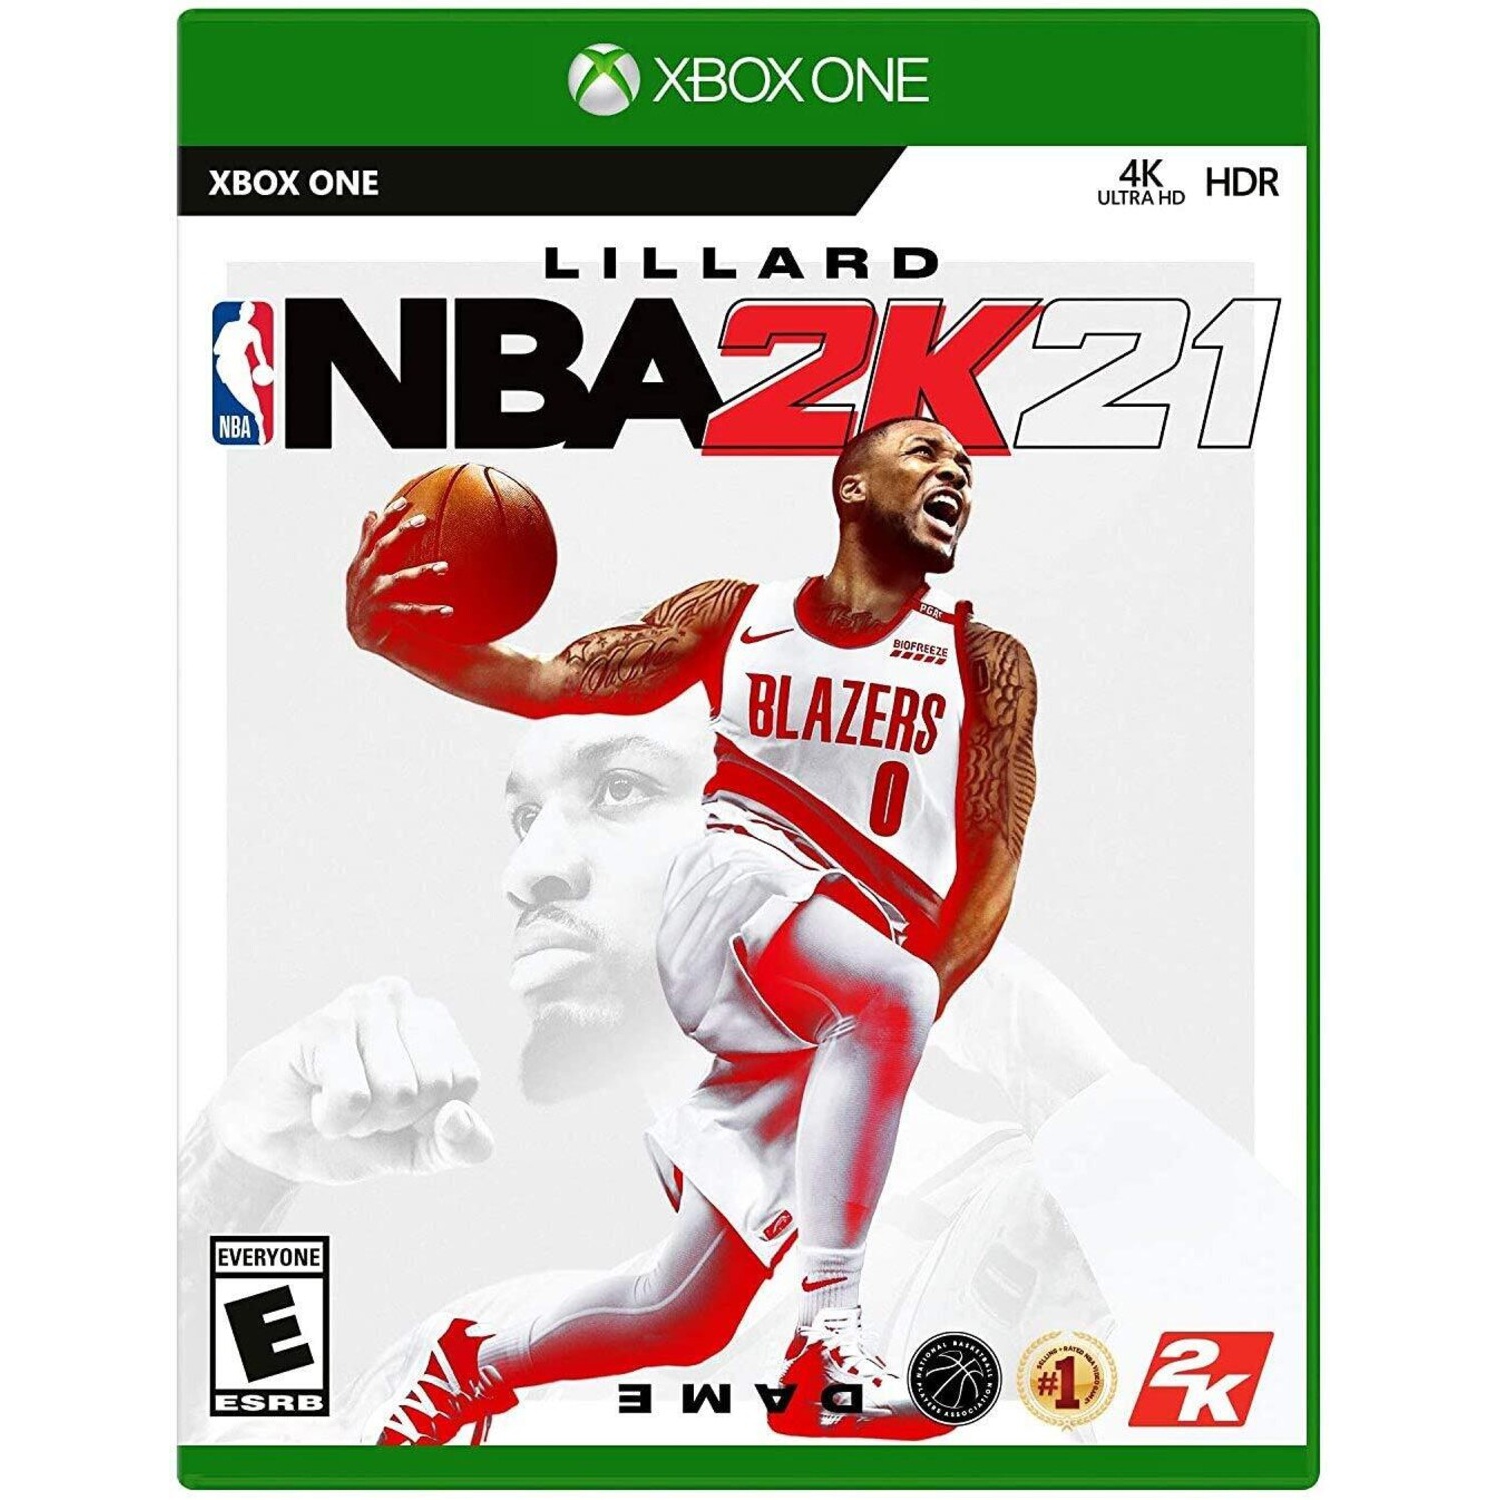 NBA 2K21 for Xbox One [VIDEOGAMES]